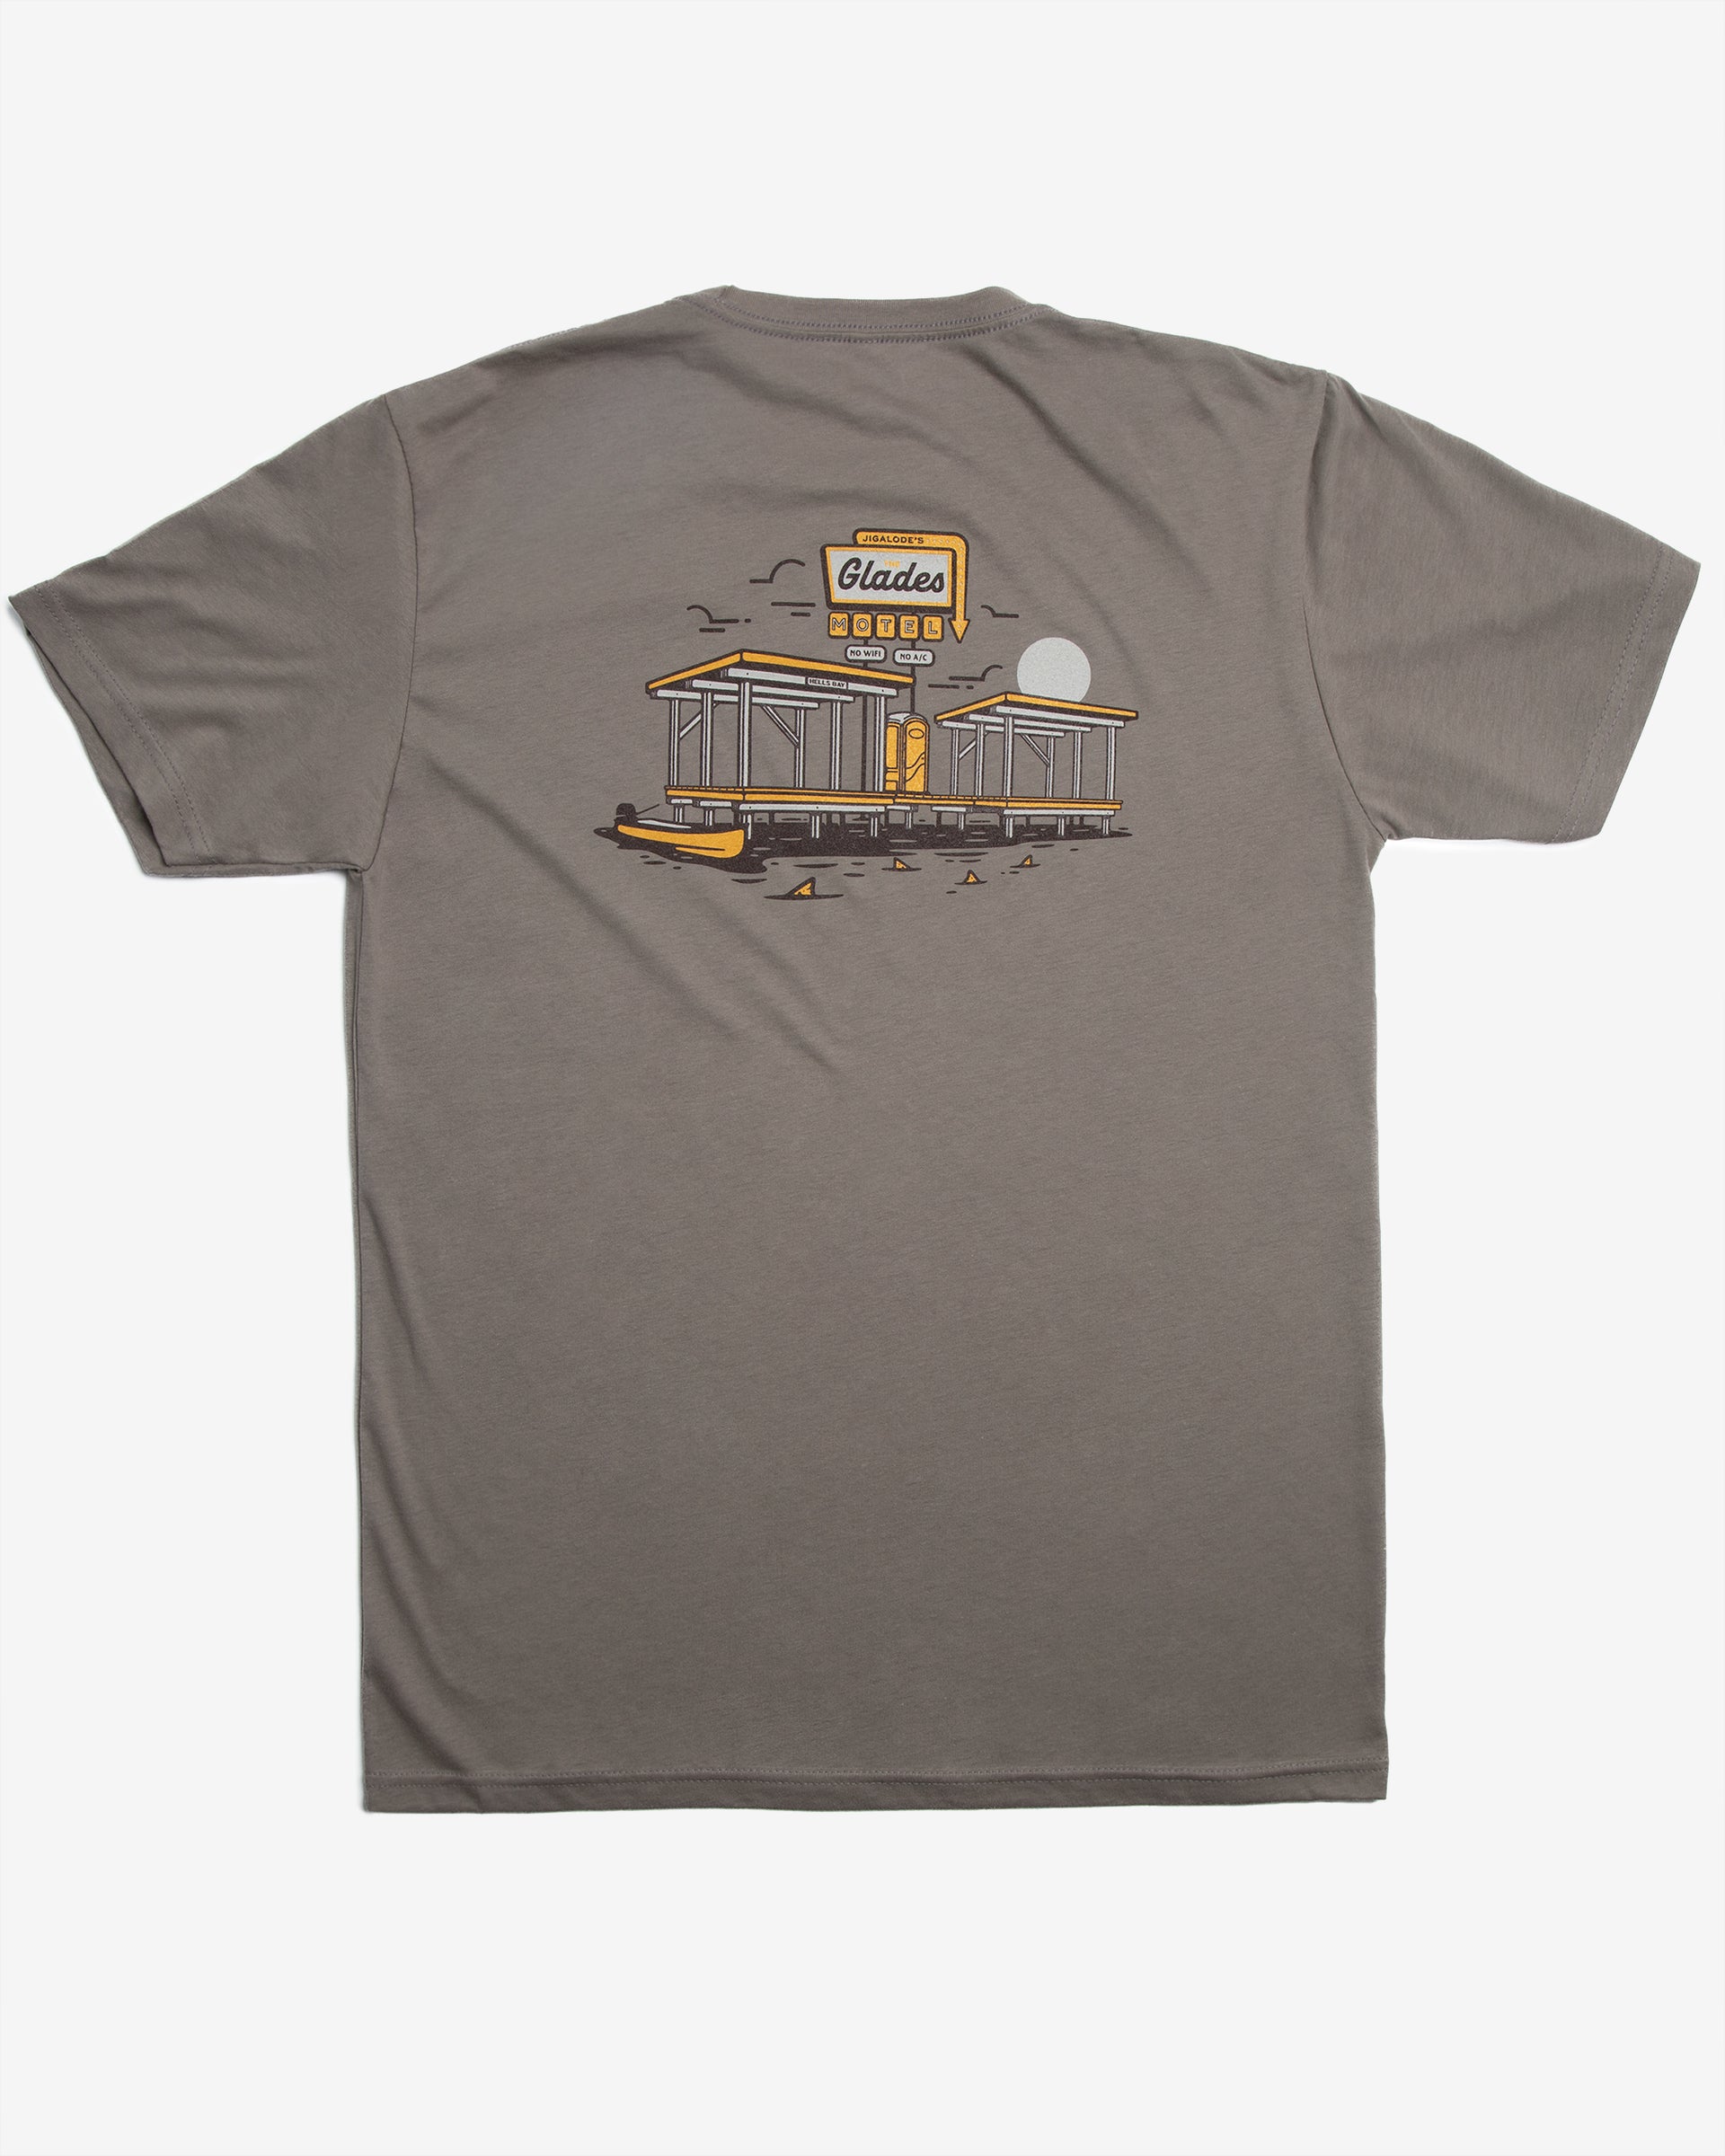 Front flat view of the Jigalode 'Glades Motel' t-shirt in warm gray. The short sleeve cotton fishing t-shirt showcases artwork of an everglades chickee with a vintage motel sign above it that reads 'The Glades Motel: No Wi-Fi, No A/C.' The design also features a gheenoe in the water with redfish tails surrounding it.